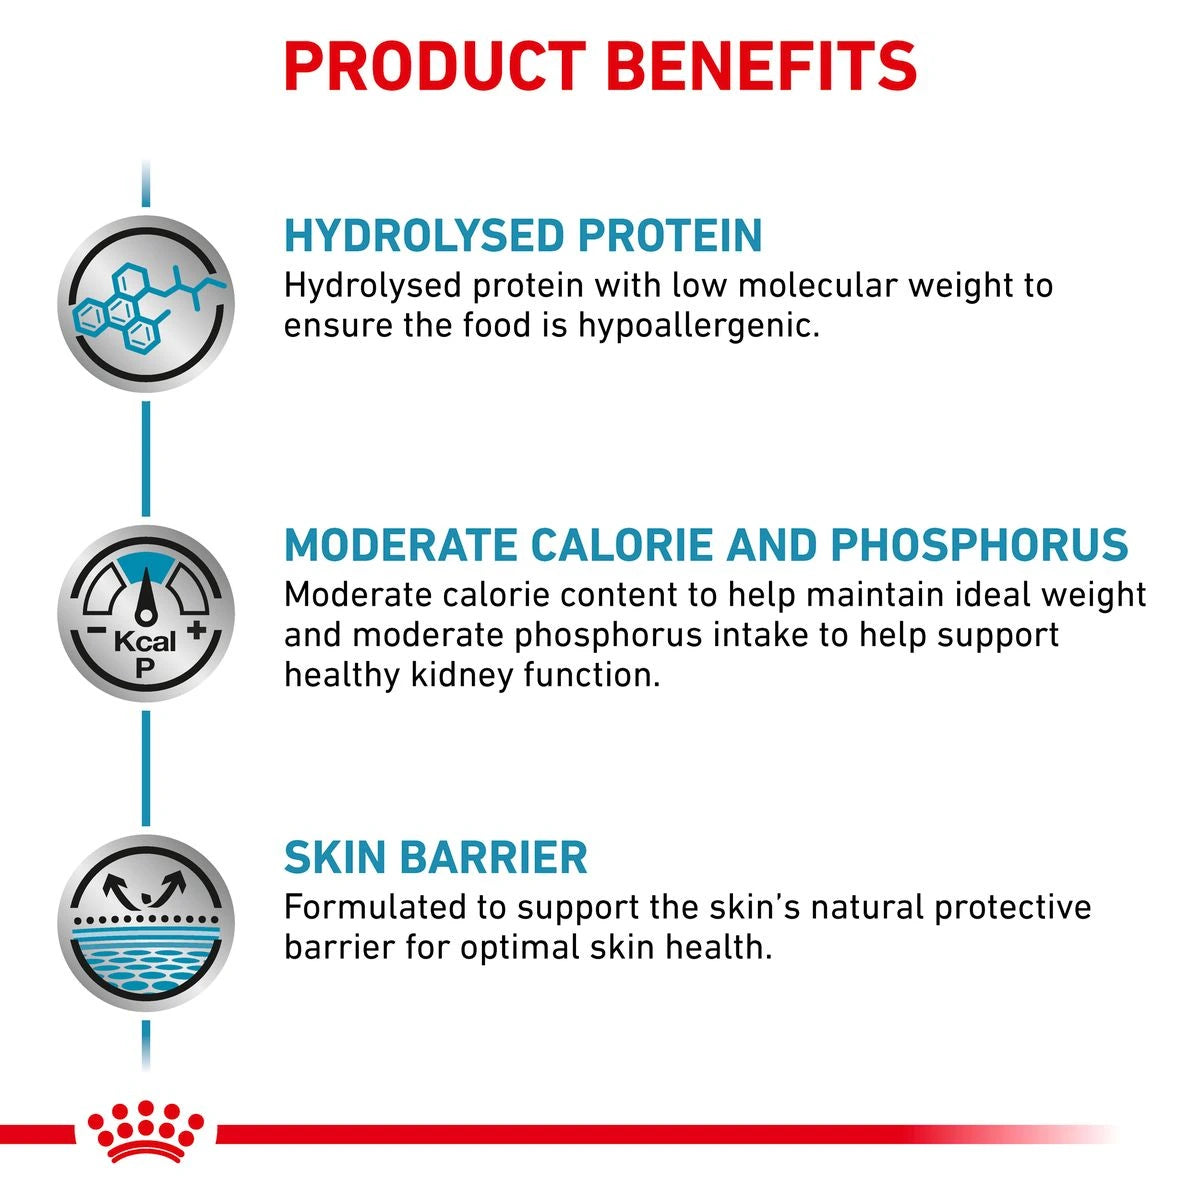 Royal Canin Canine Hypoallergenic Moderate Calorie product benefits